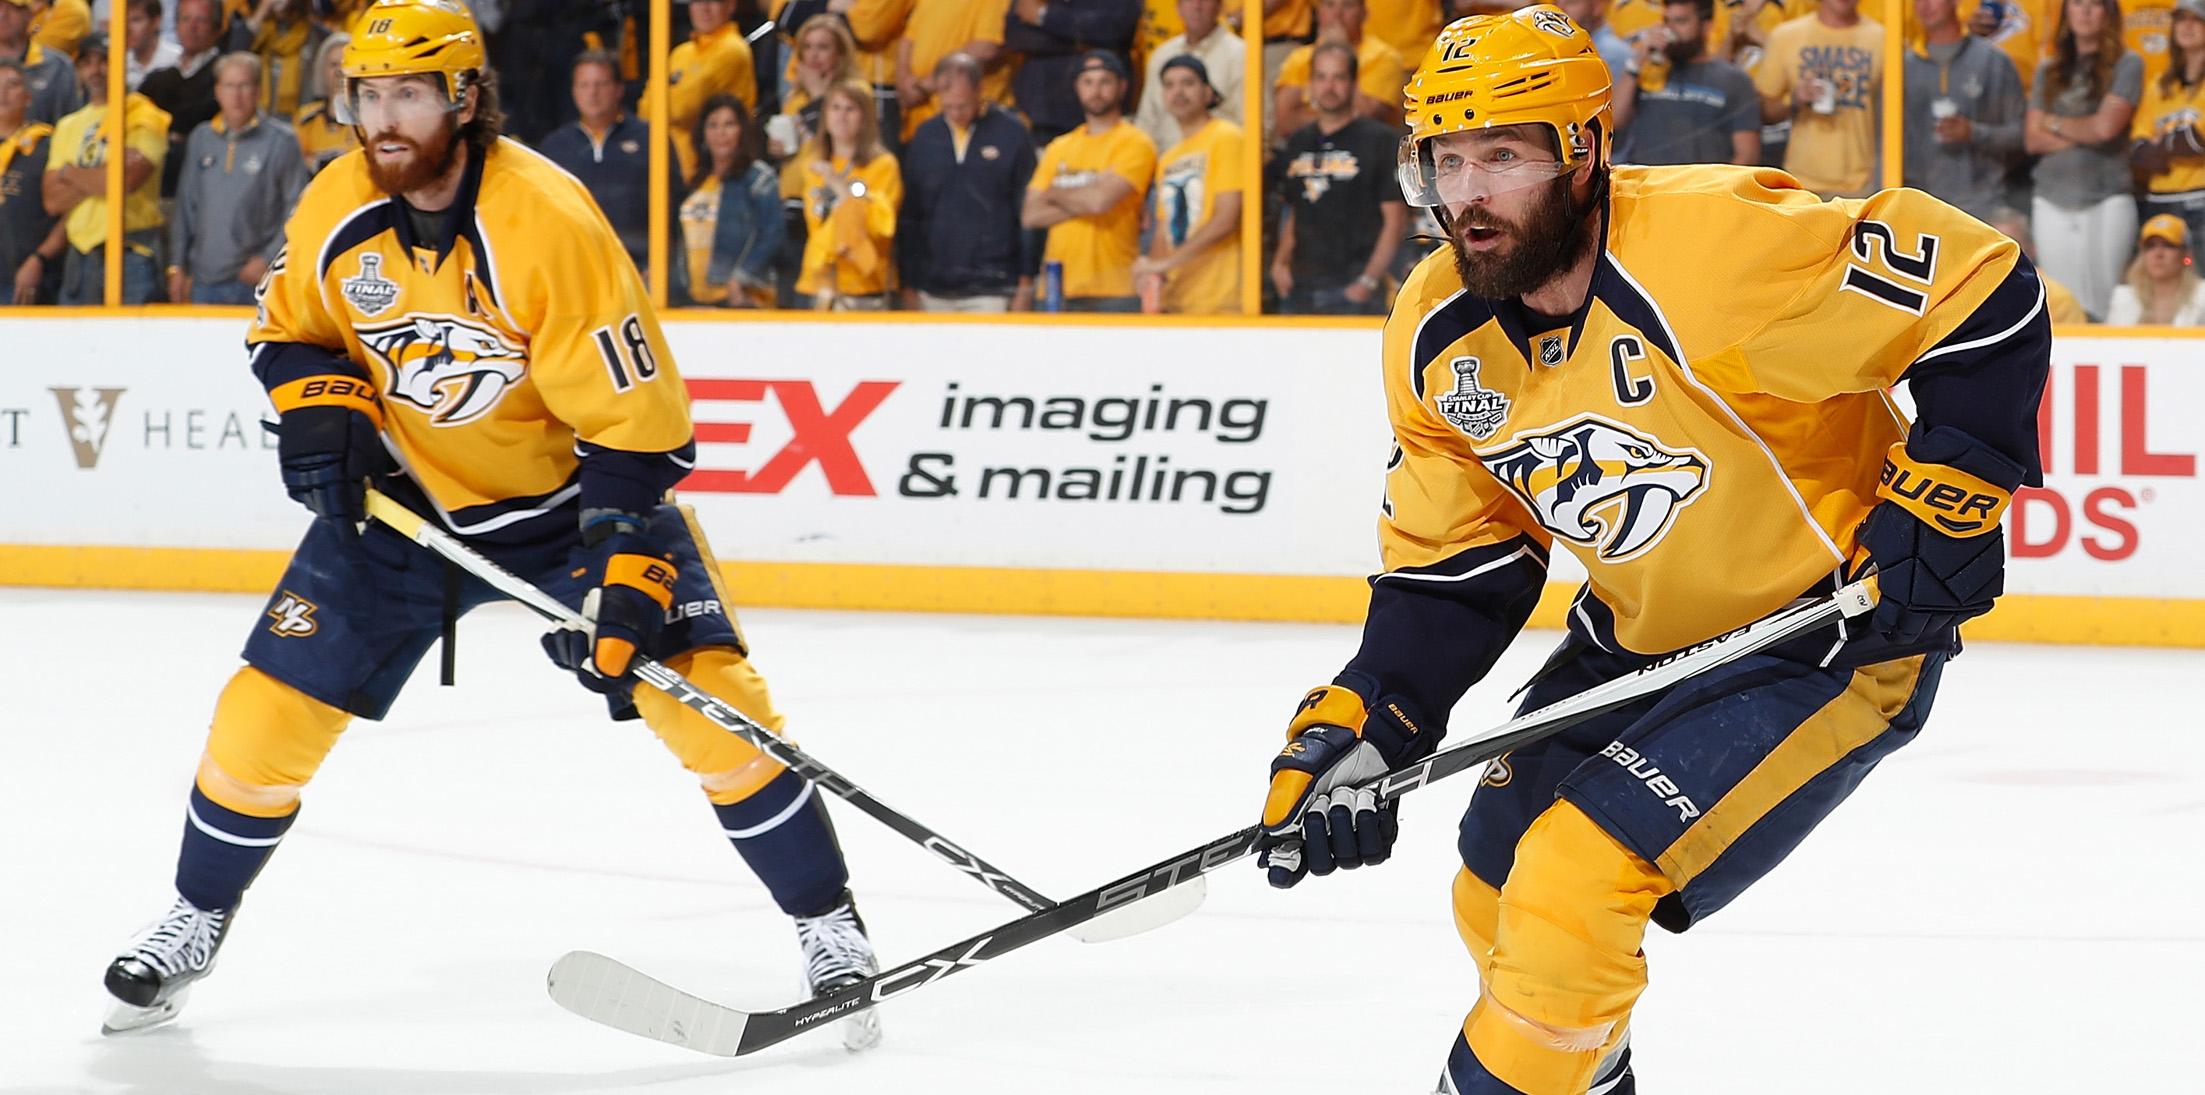 Carrie Underwood's Husband Mike Fisher Retires From the NHL